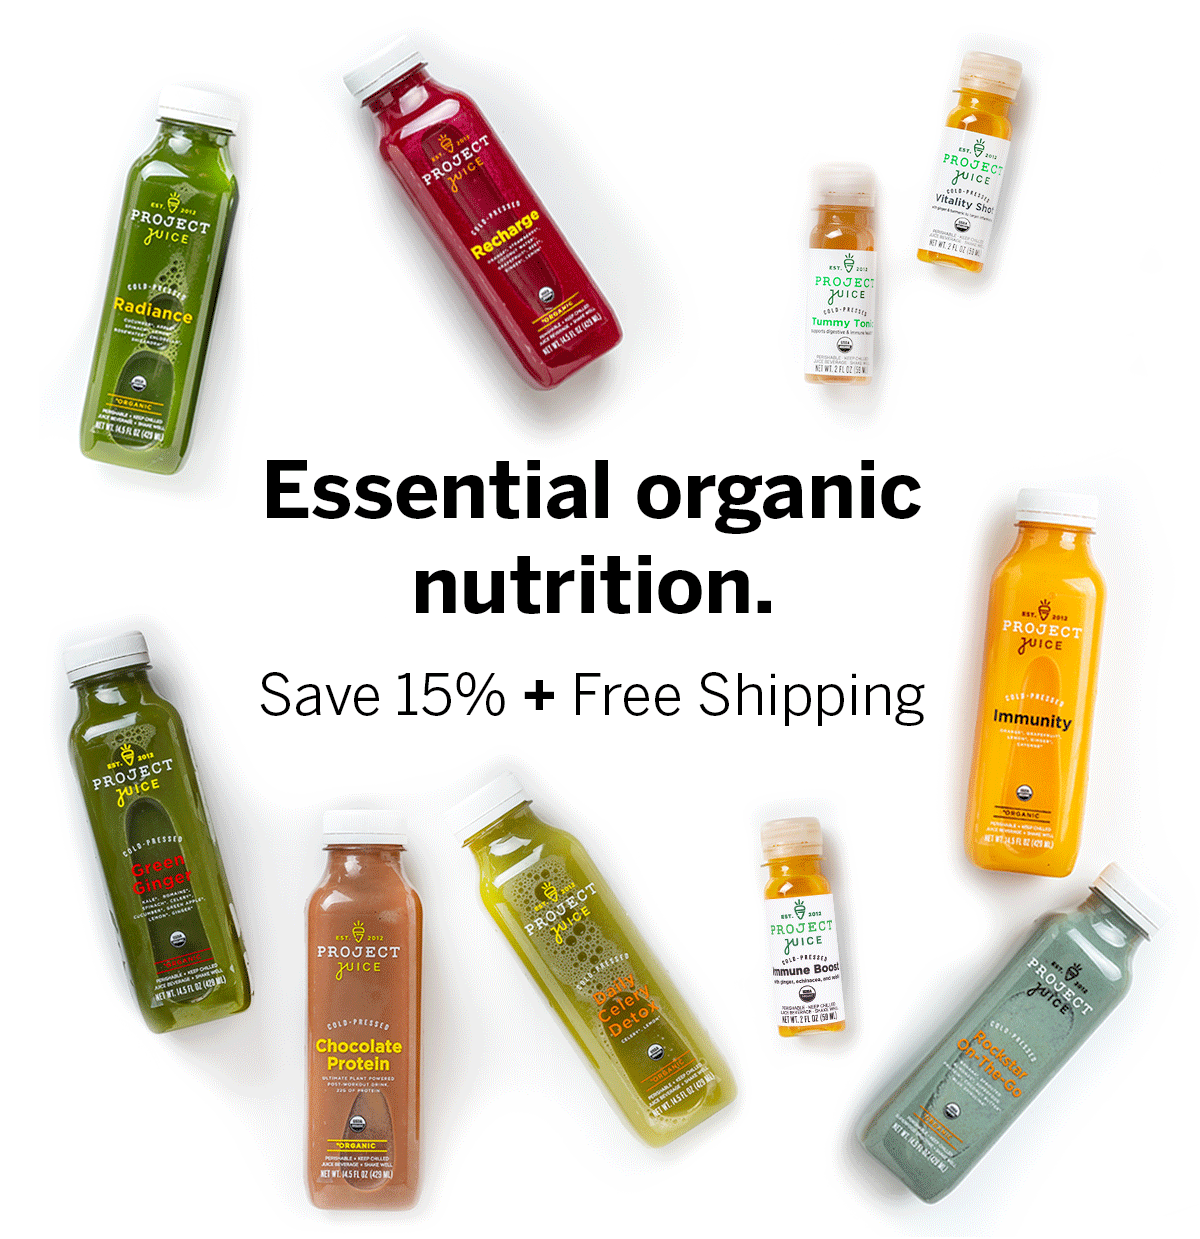 essential organic nutrition. Save 15% + Free Shipping